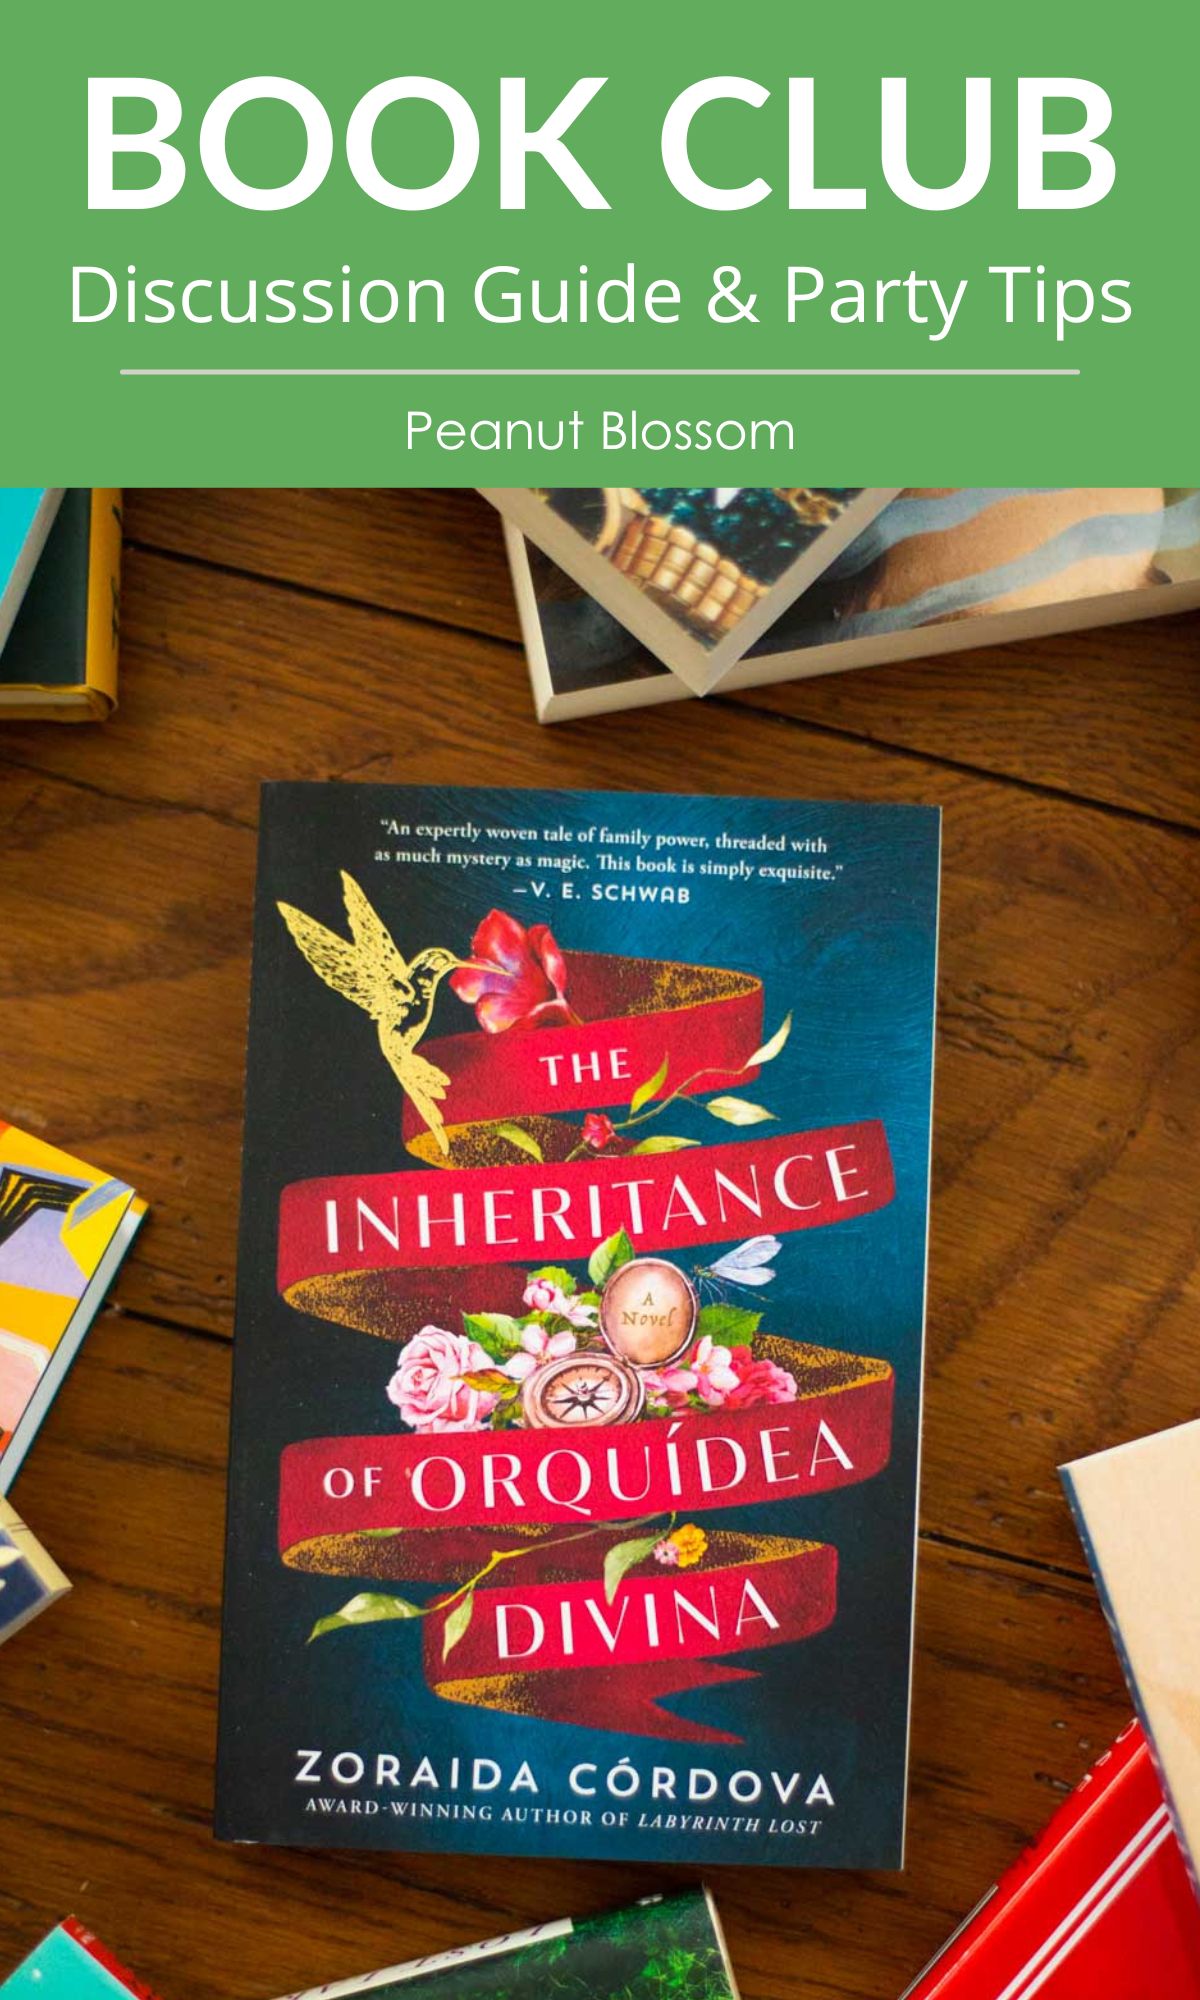 A copy of the book The Inheritance of Orquídea Divina by Zoraida Córdova sits on the table.